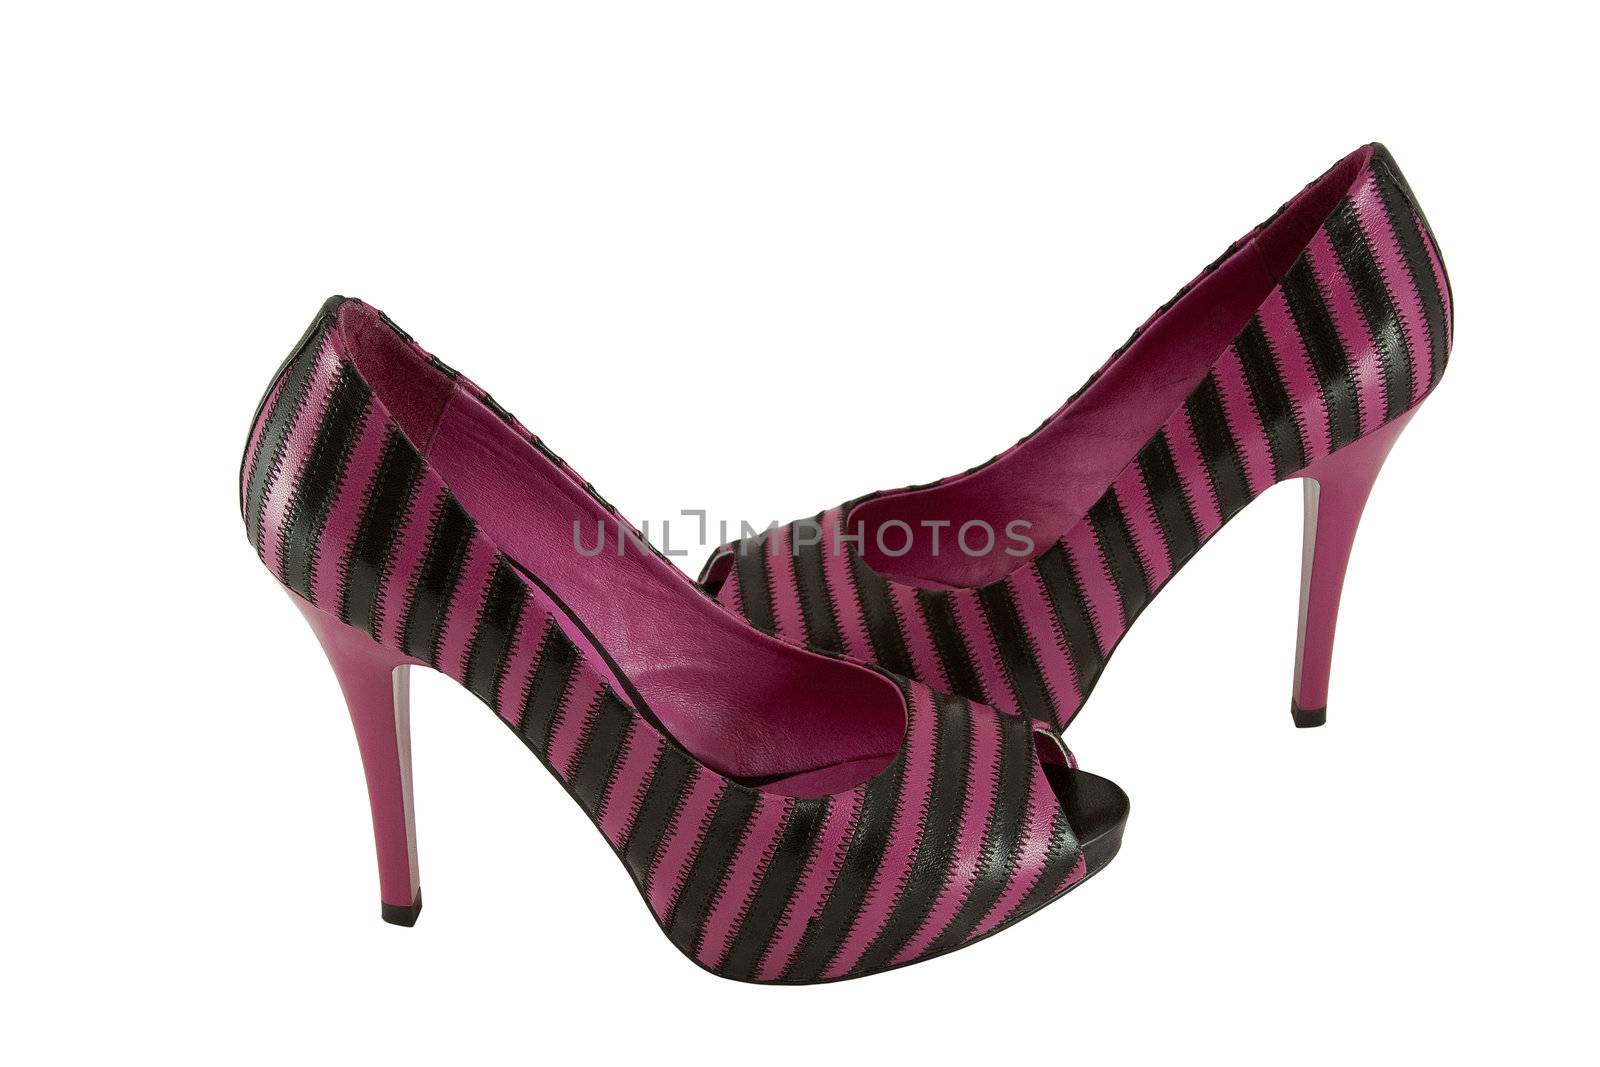 Ladies' shoes in black and pink strips by Jaklin